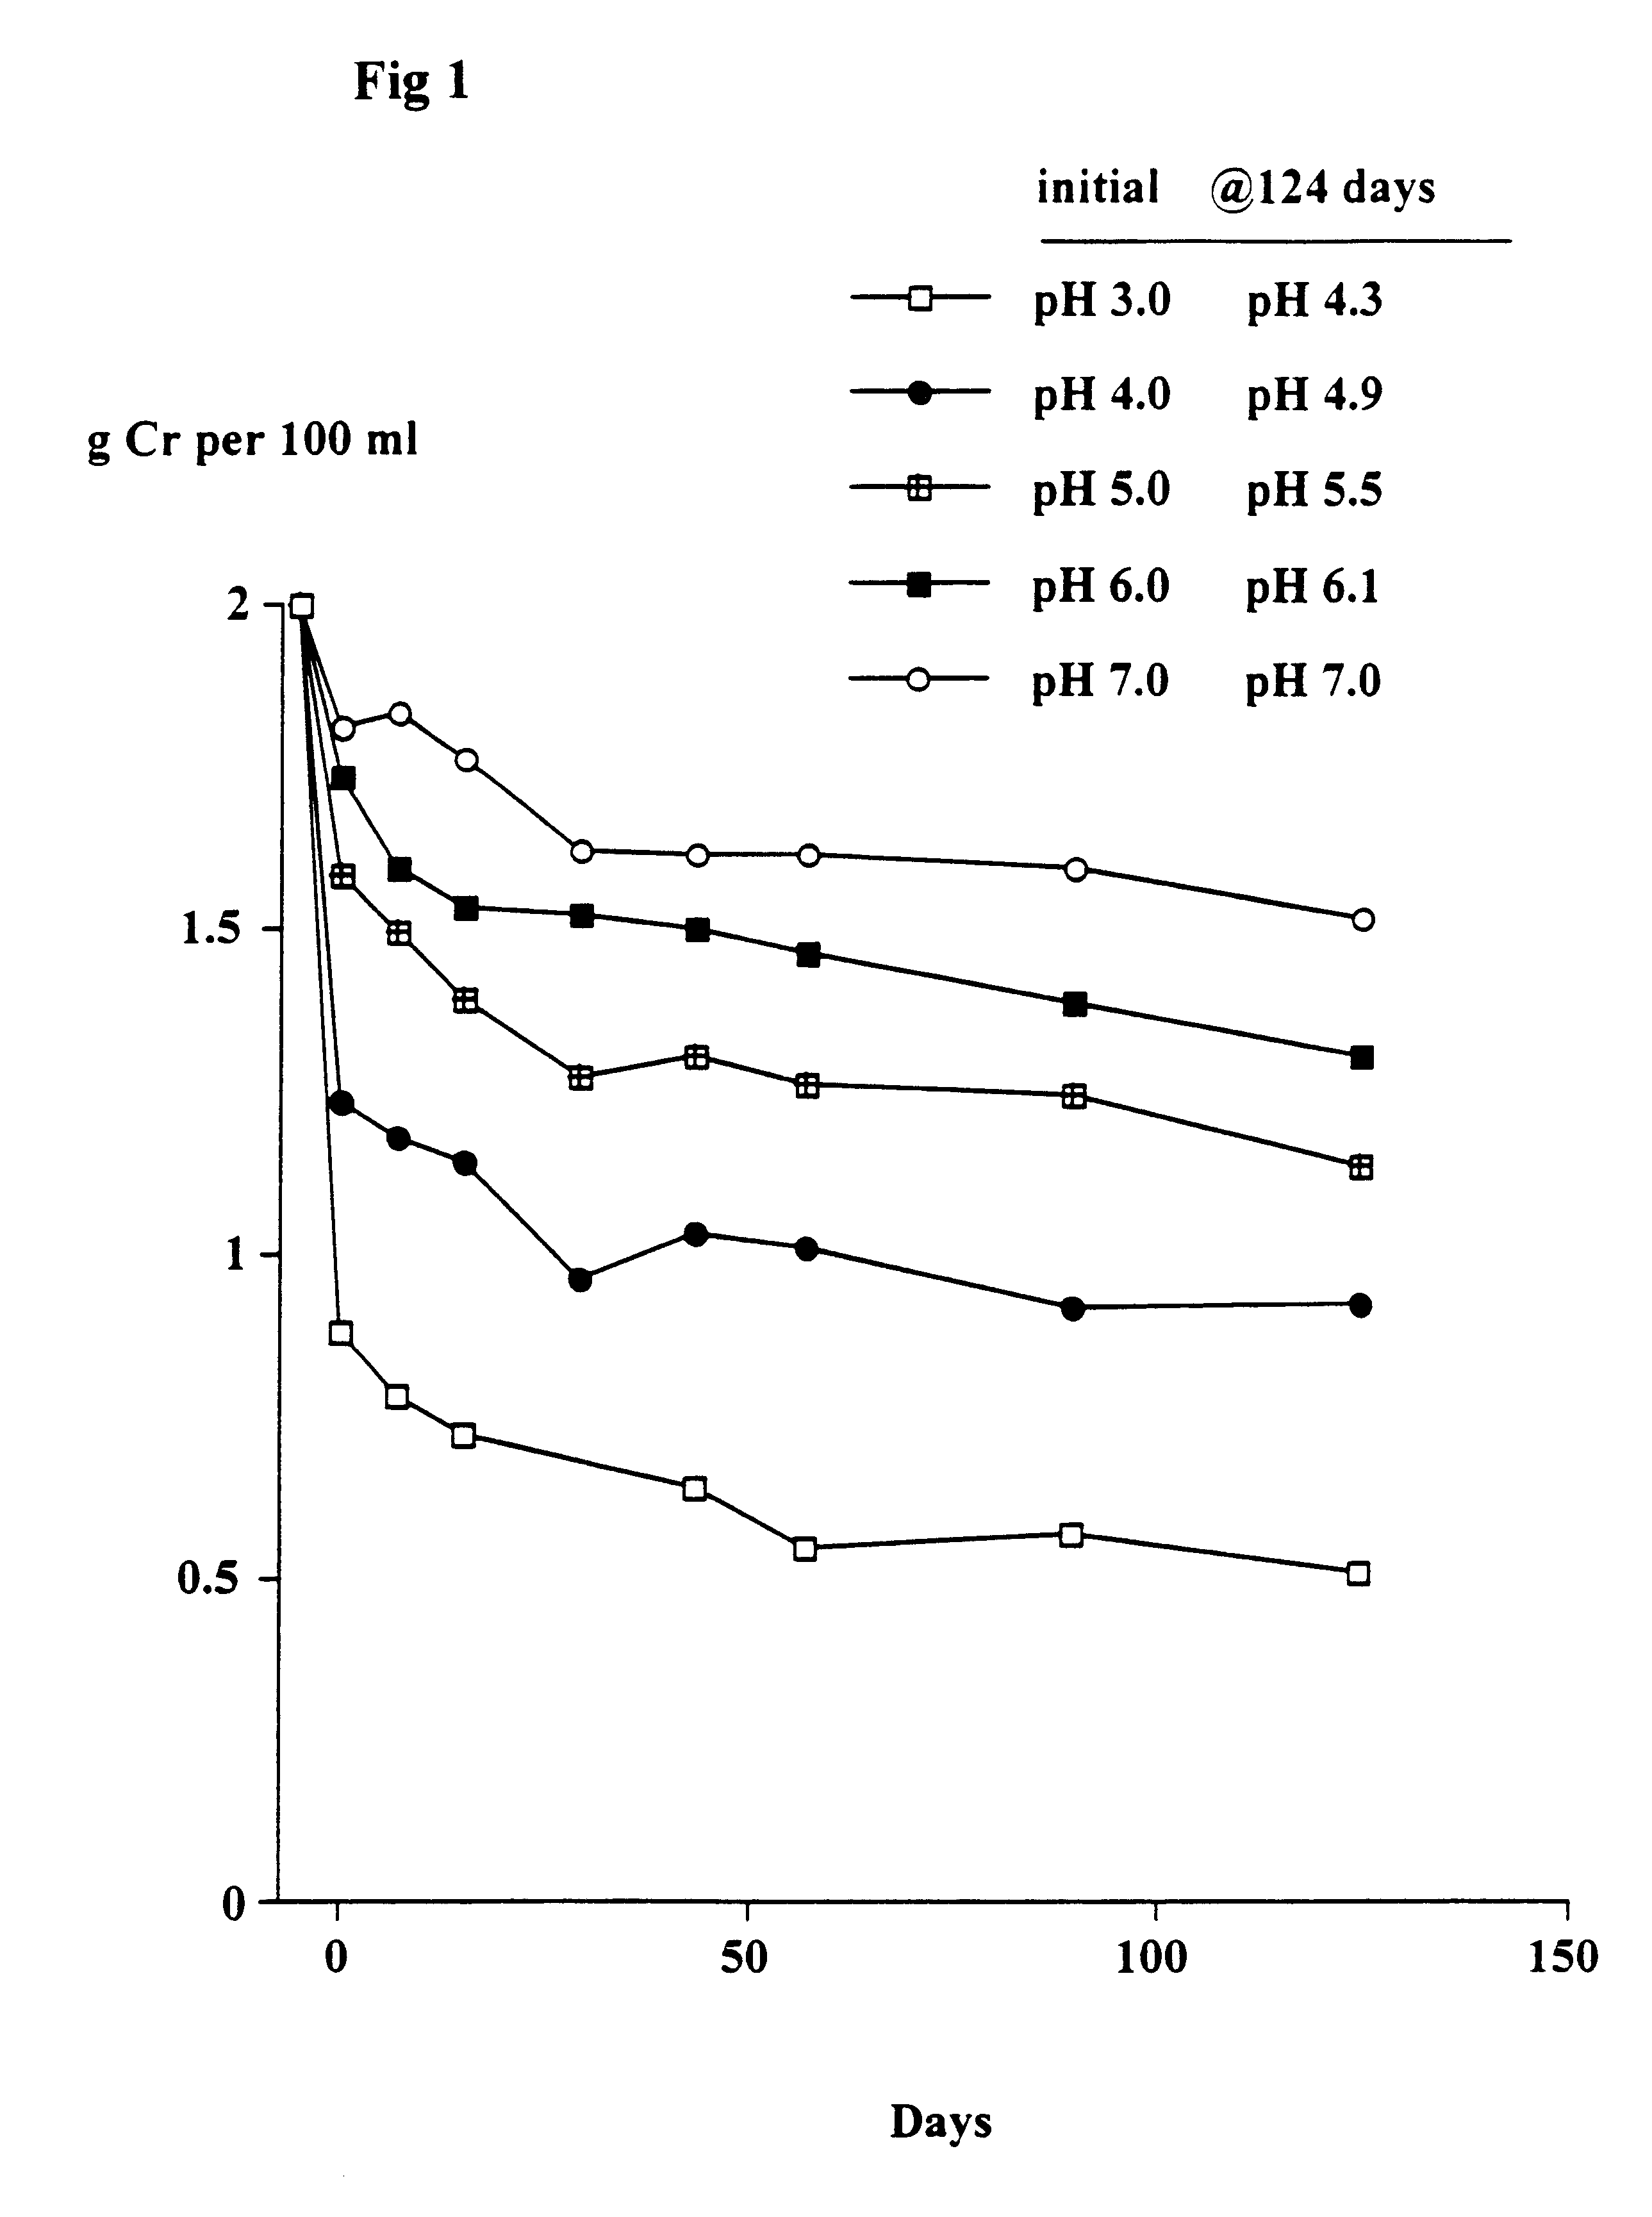 Compositions containing creatine and creatinine